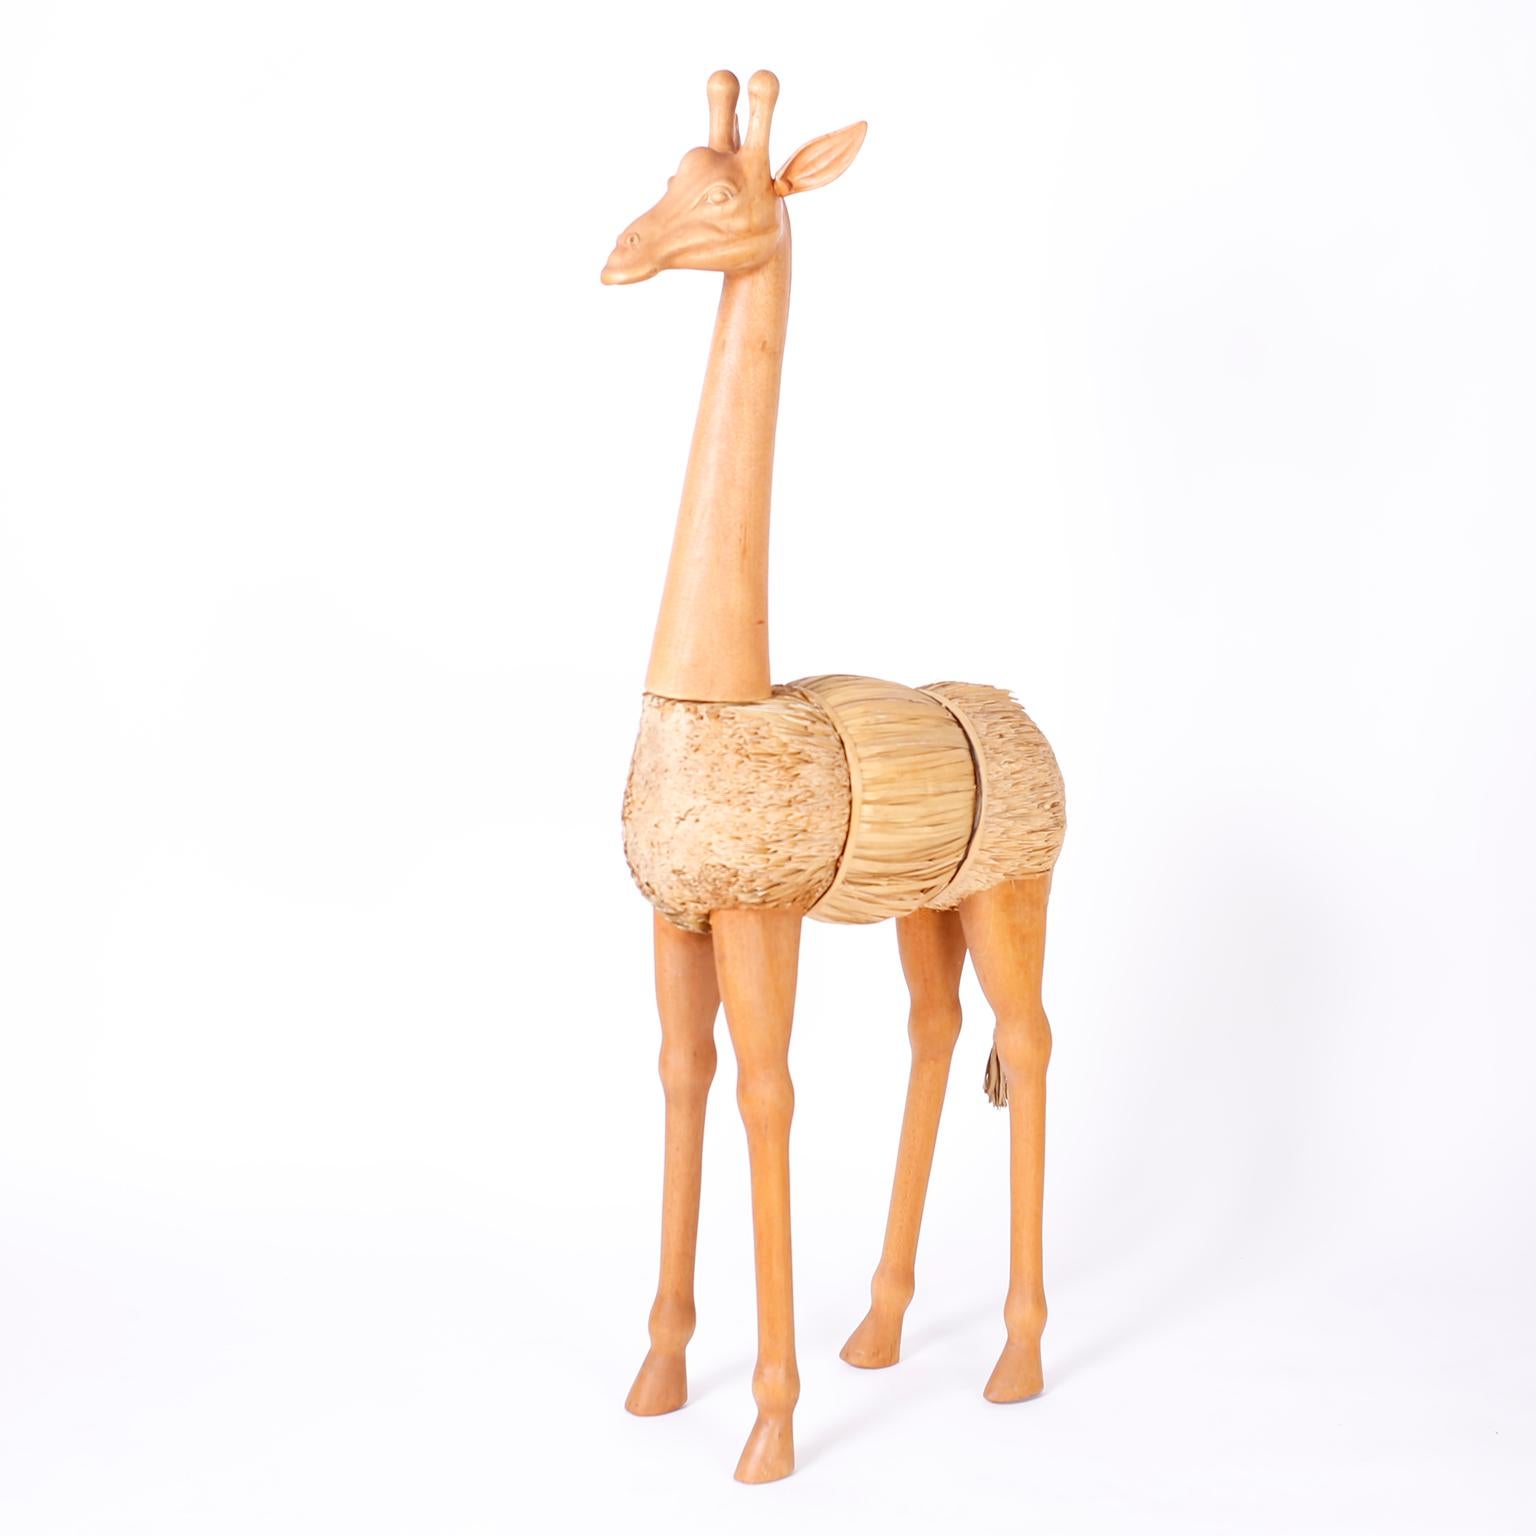 Stand out pair of mid century giraffes one standing and one grazing with a unique construction of shaved reed bundles and having carved wood heads, necks, and legs.

Standing Giraffe: H: 60, W: 28, D: 8
Grazing Giraffe: H: 34, W: 43, D: 9.